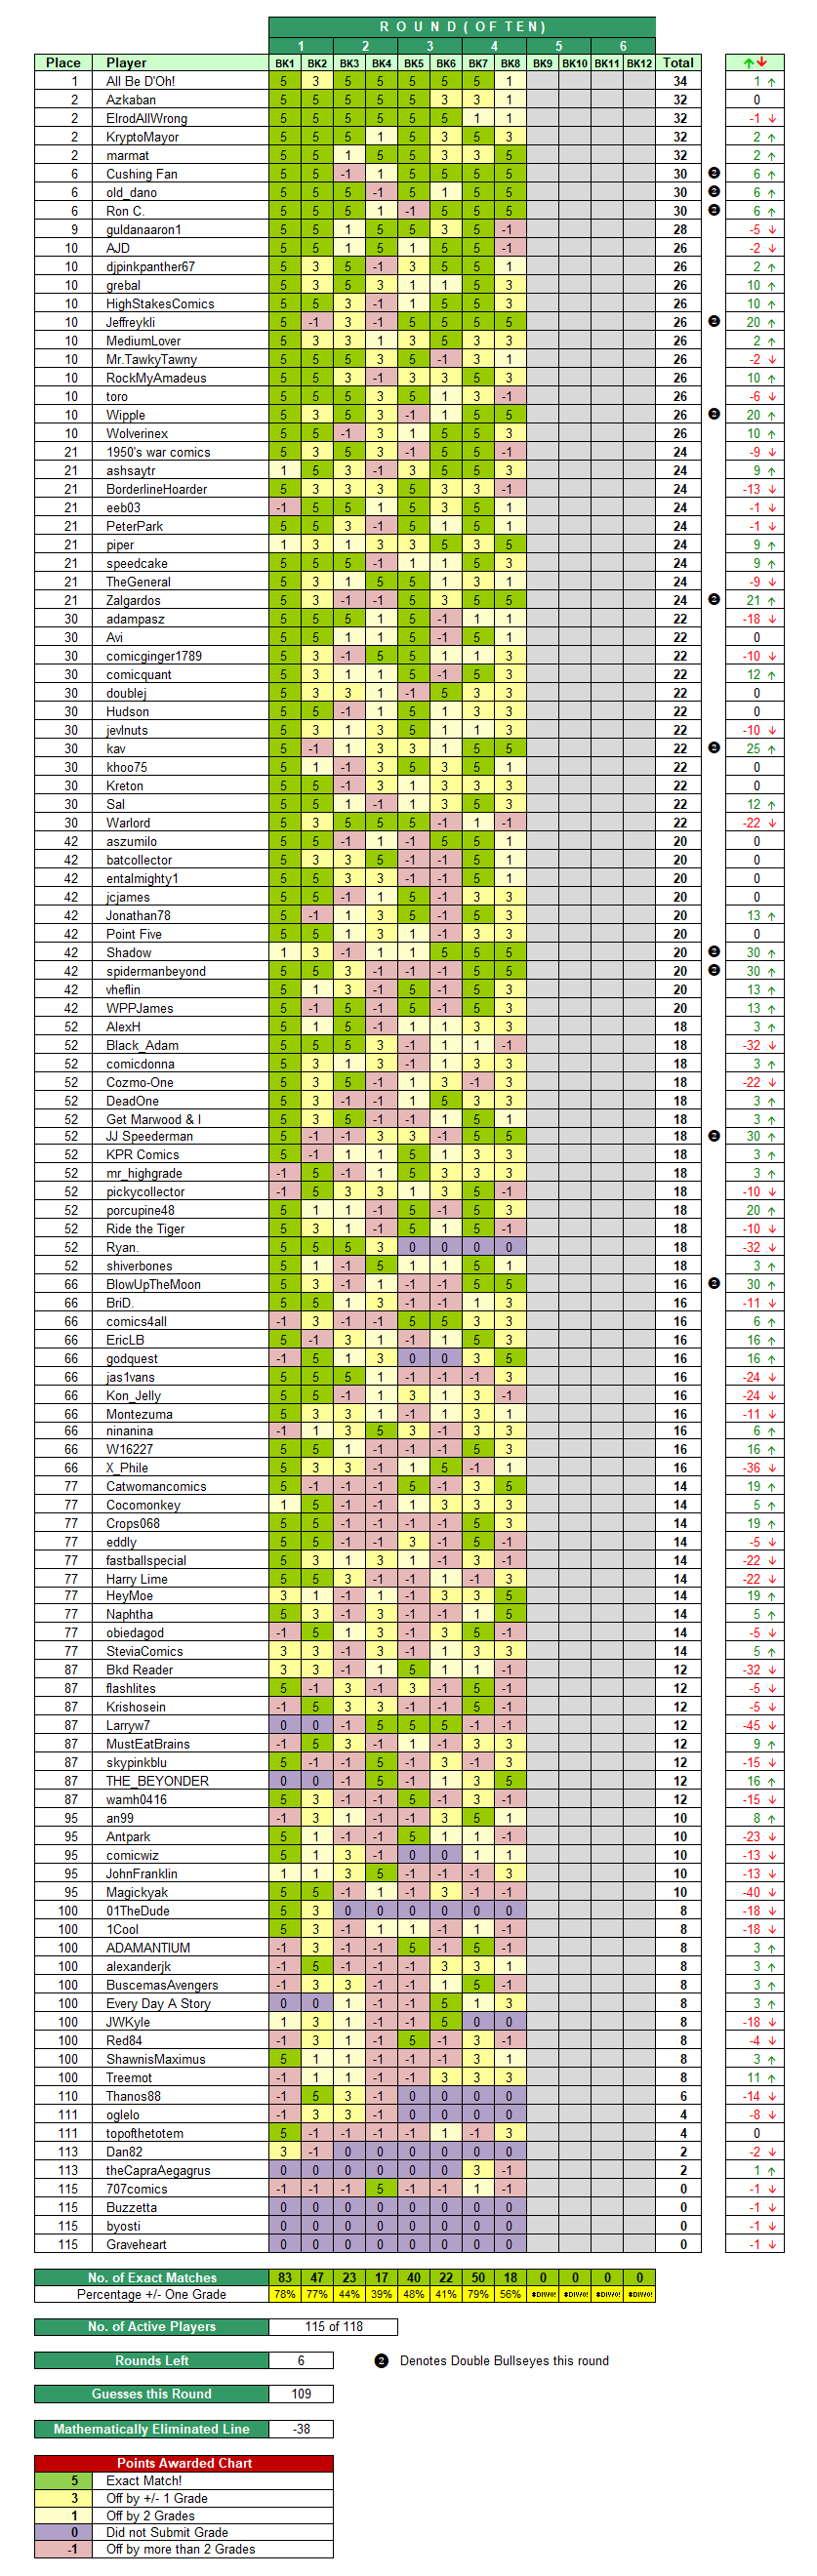 Round-4-Leaderboard.png